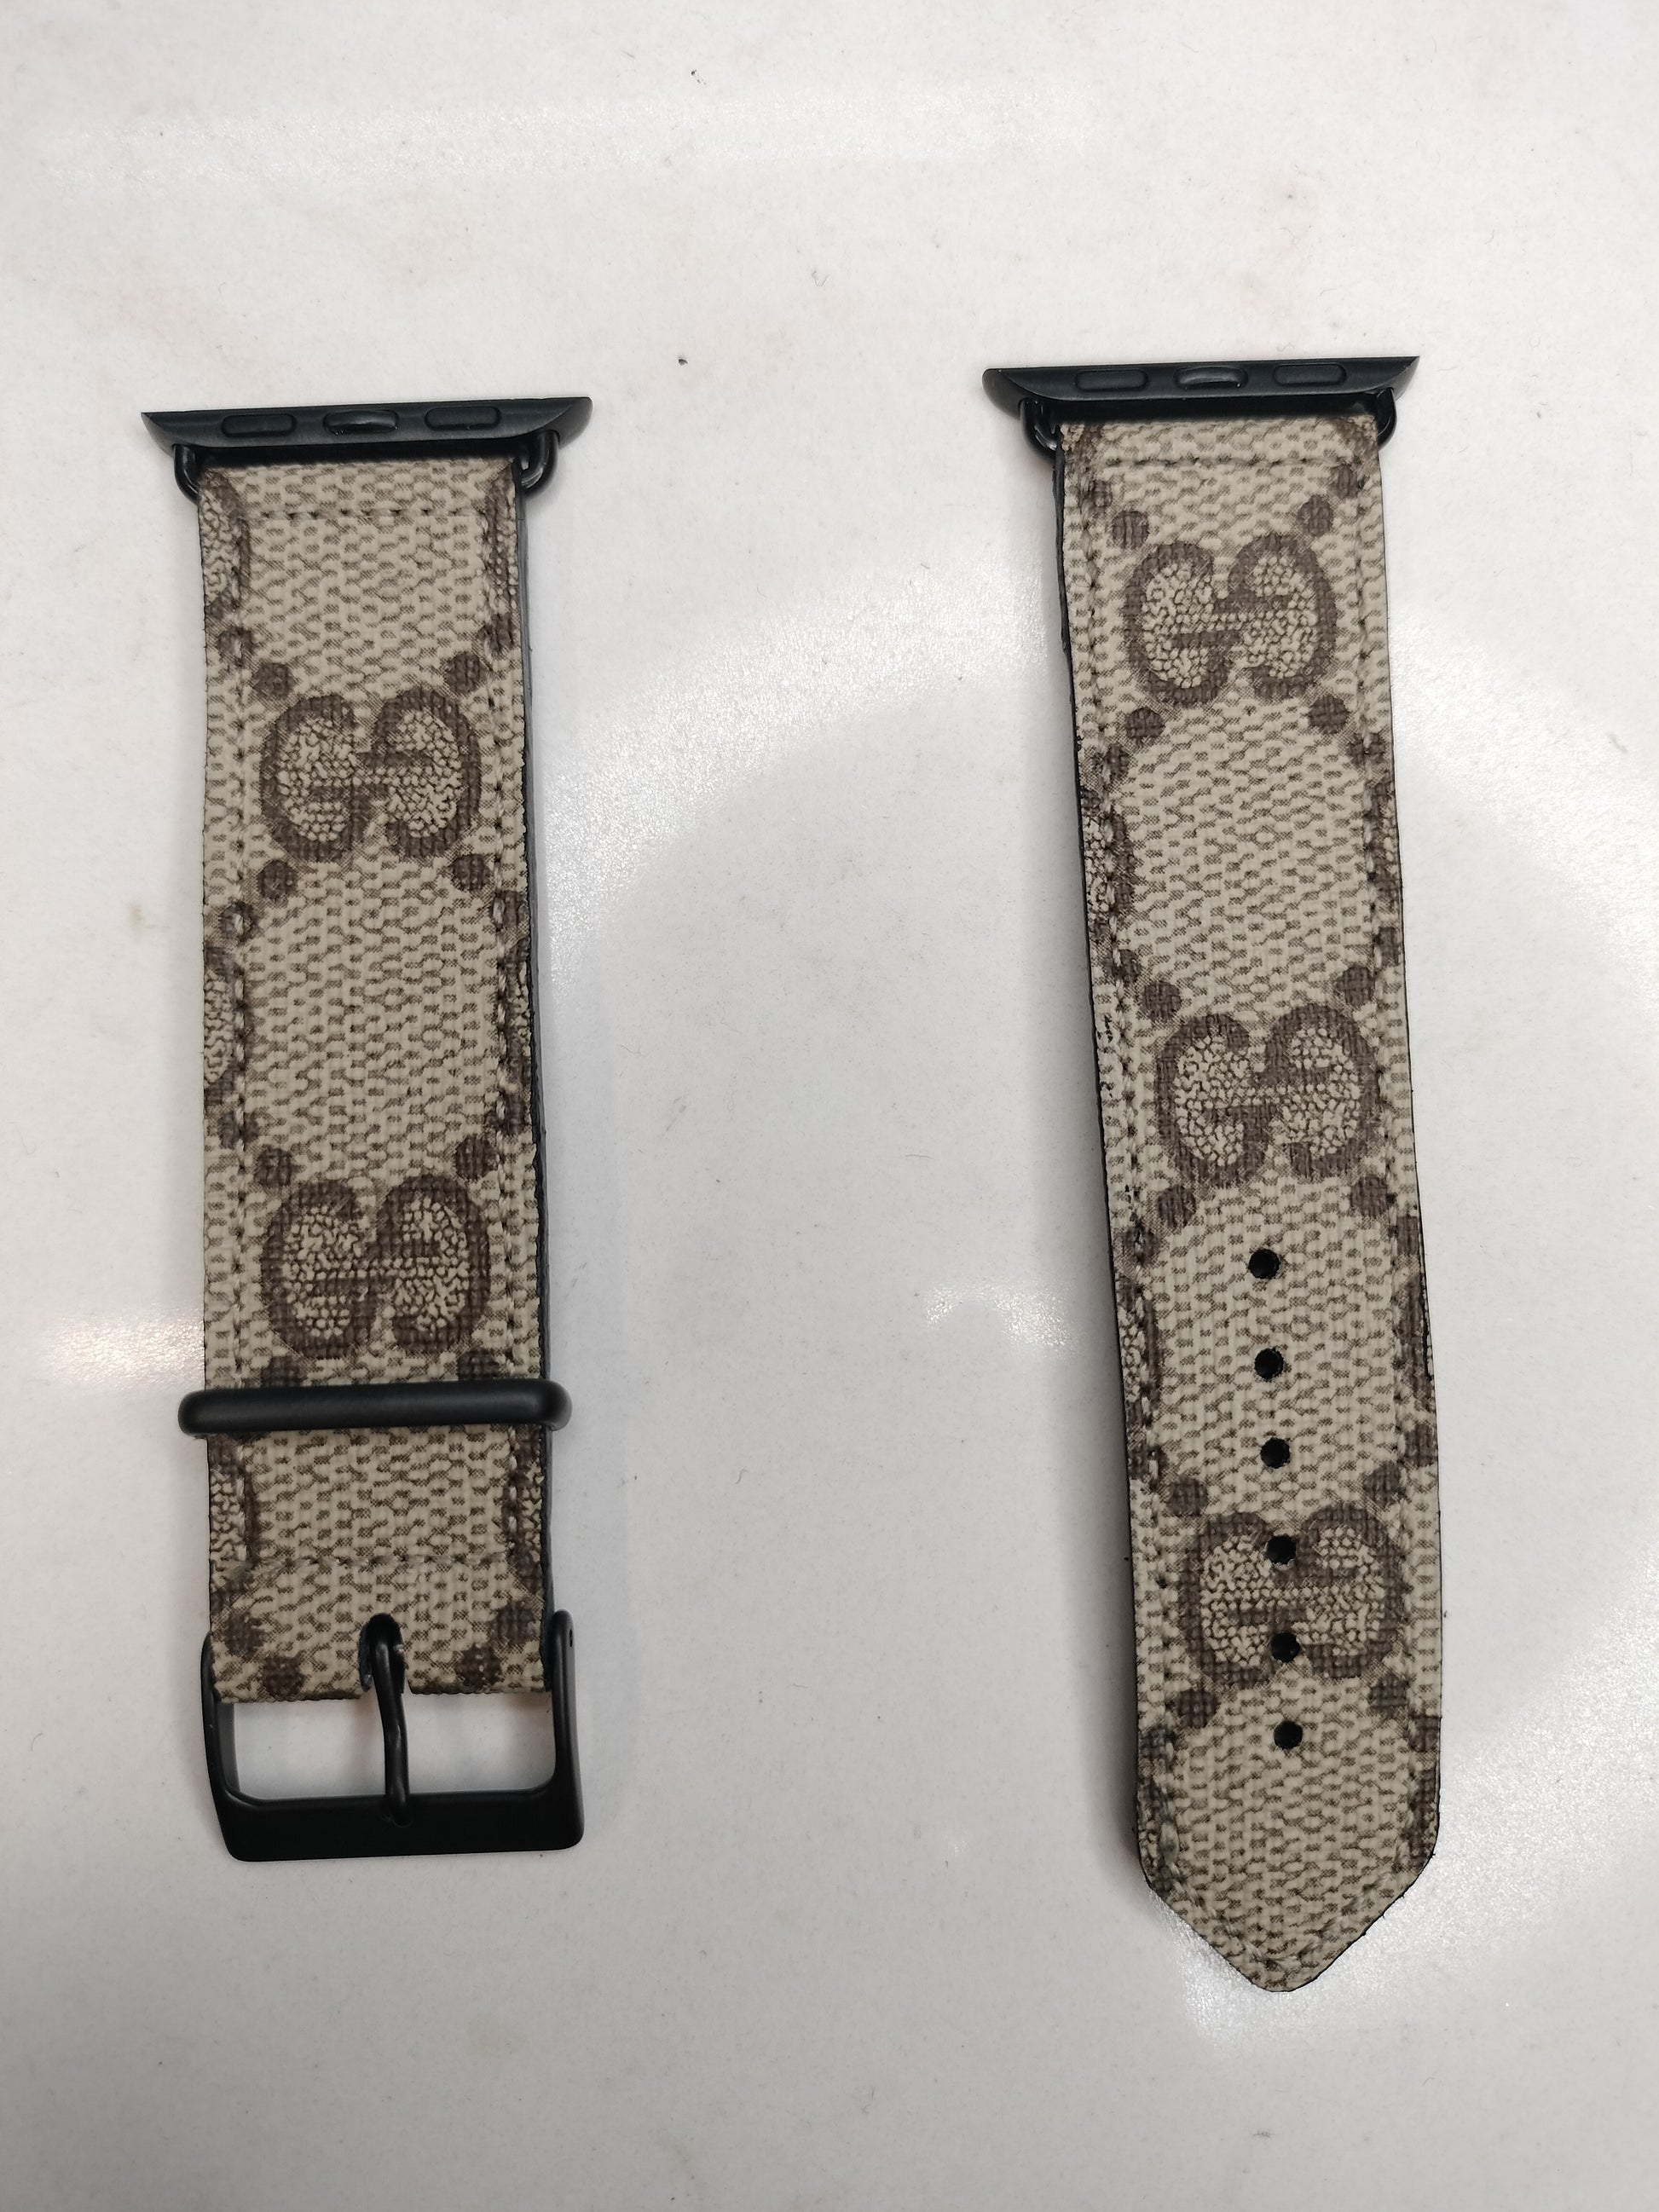 Red Gucci Apple Watch Band - Dopephonecases